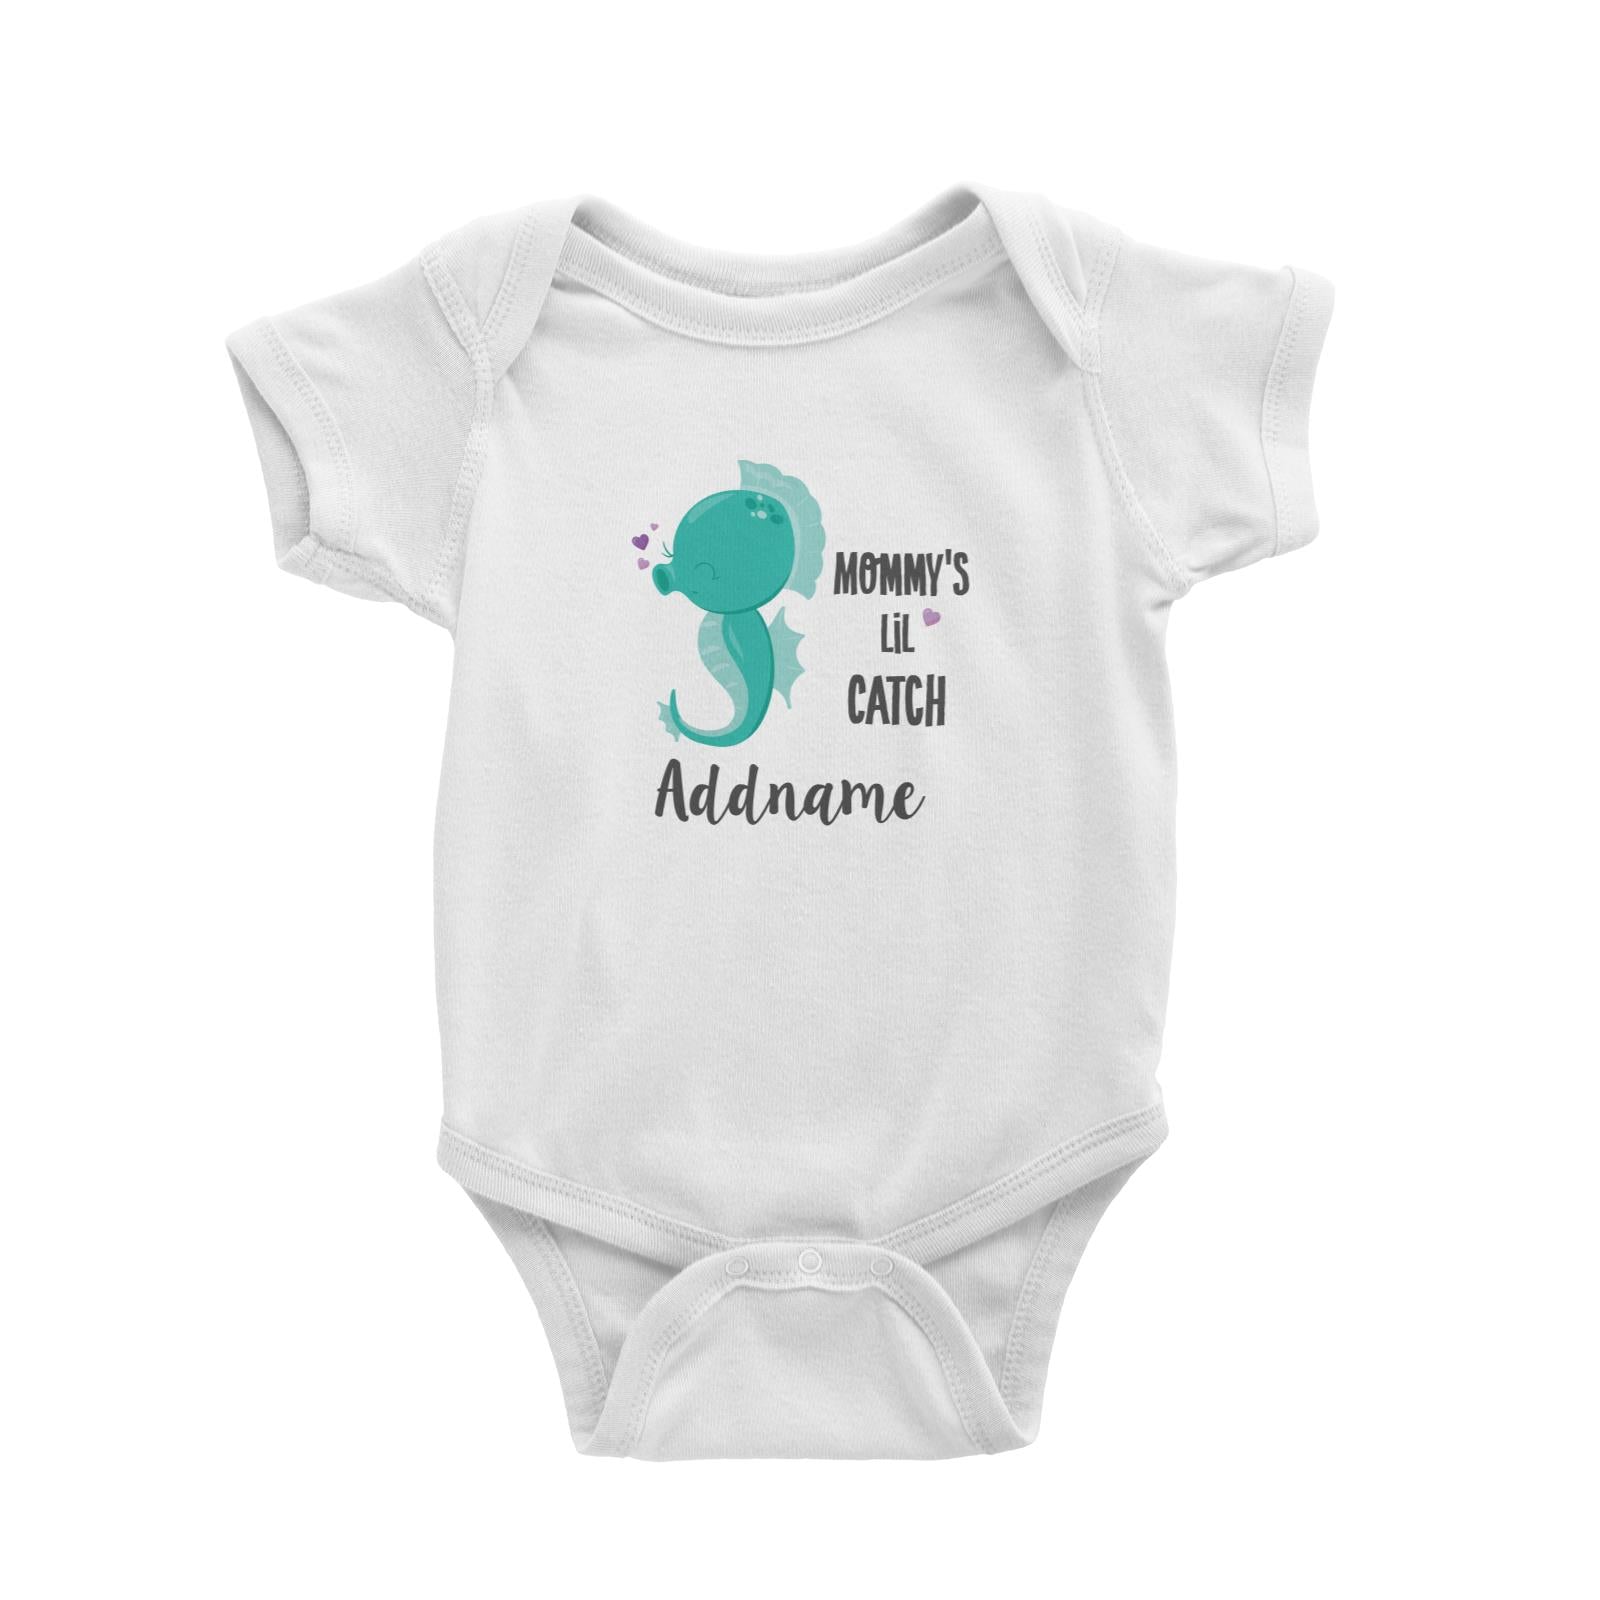 Cute Sea Animals Green Seahorse Mommy's Lil Catch Addname White Baby Romper